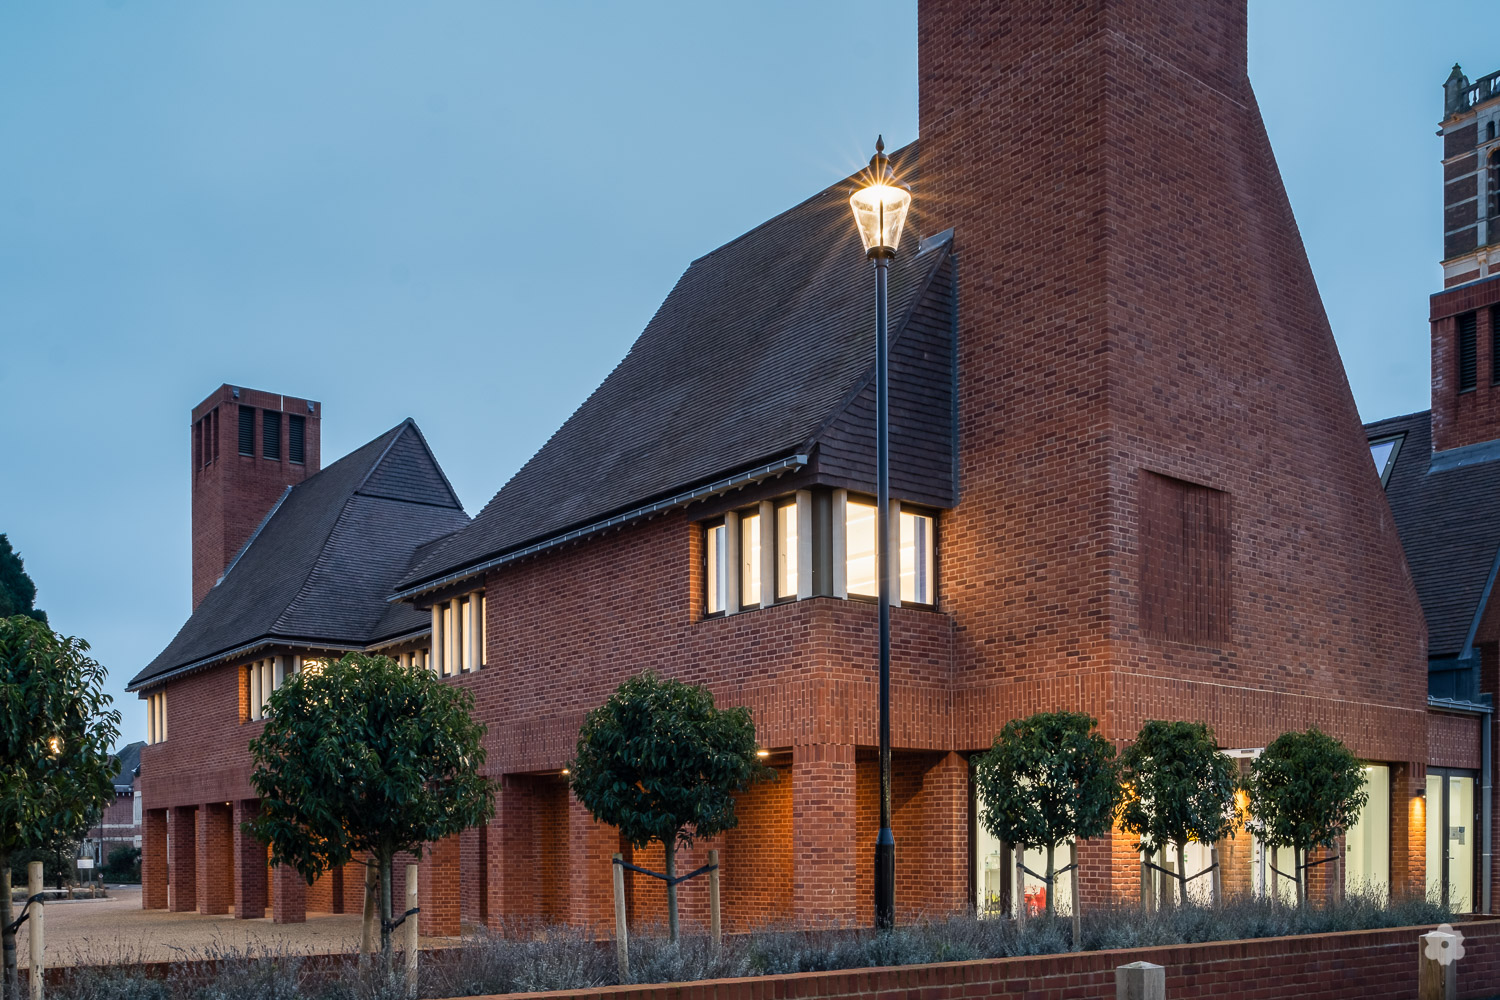 COST EFFICIENCIES AND AESTHETIC APPEAL GO HAND-IN-HAND FOR GRADE II LISTED ROOFING PROJECT